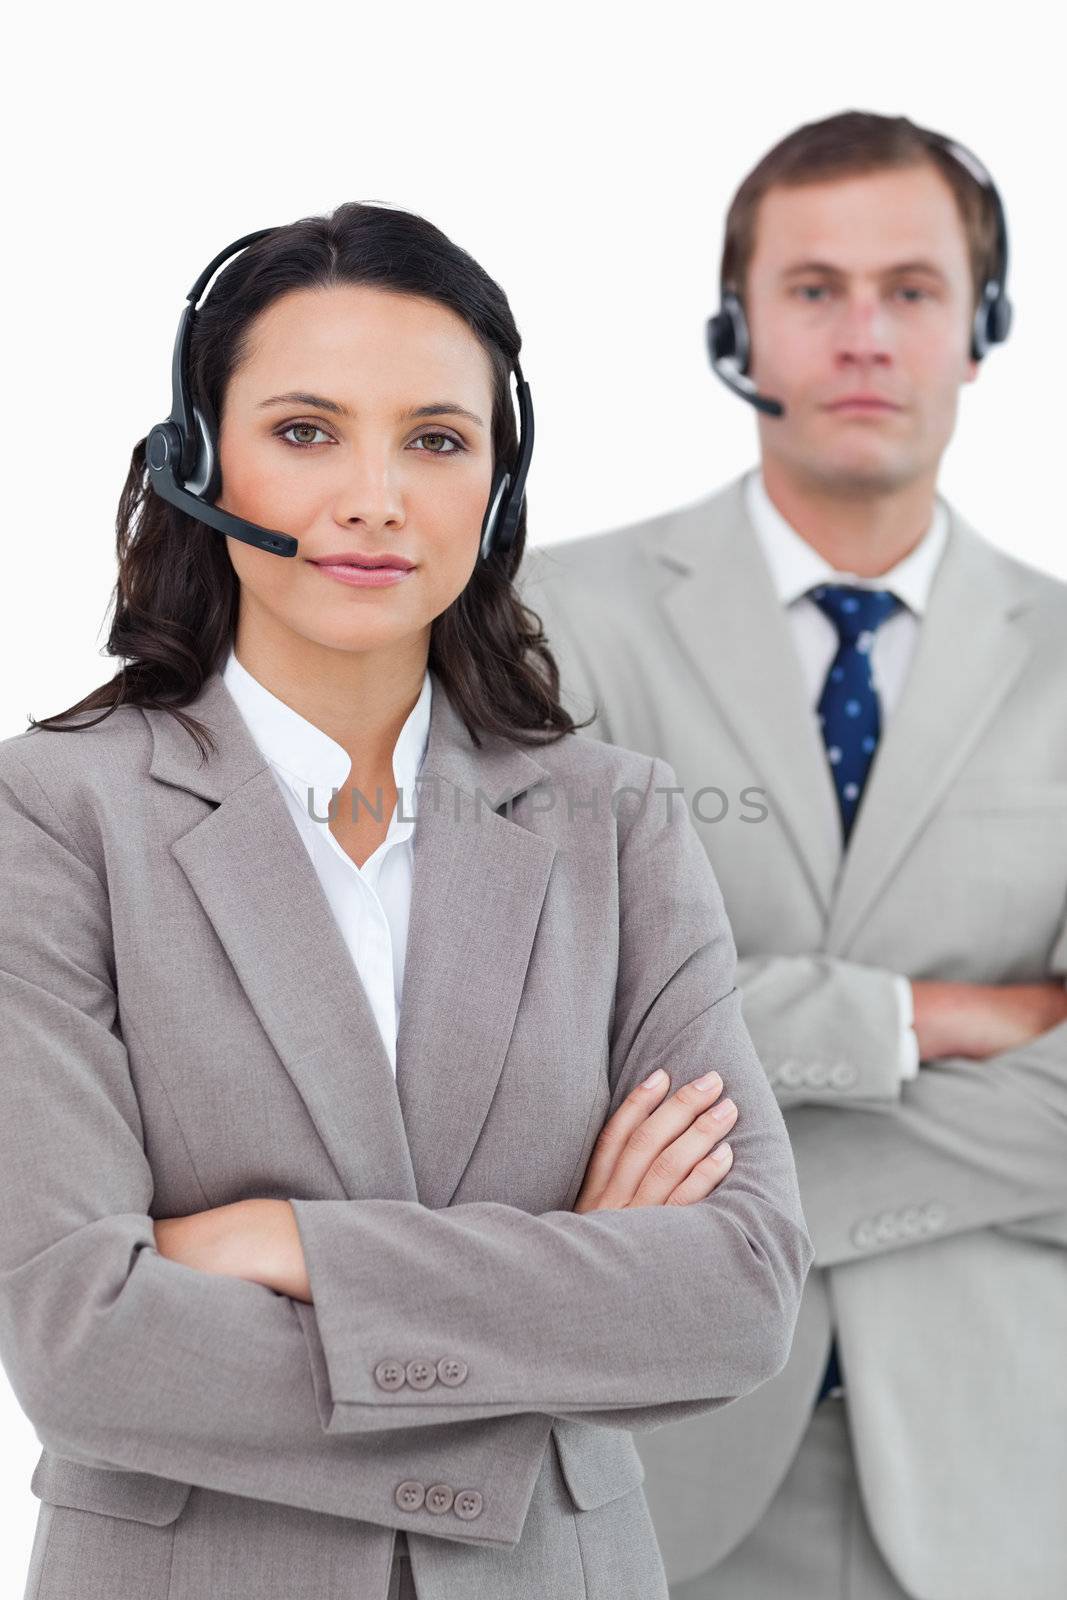 Call center agents with headsets and arms folded against a white background